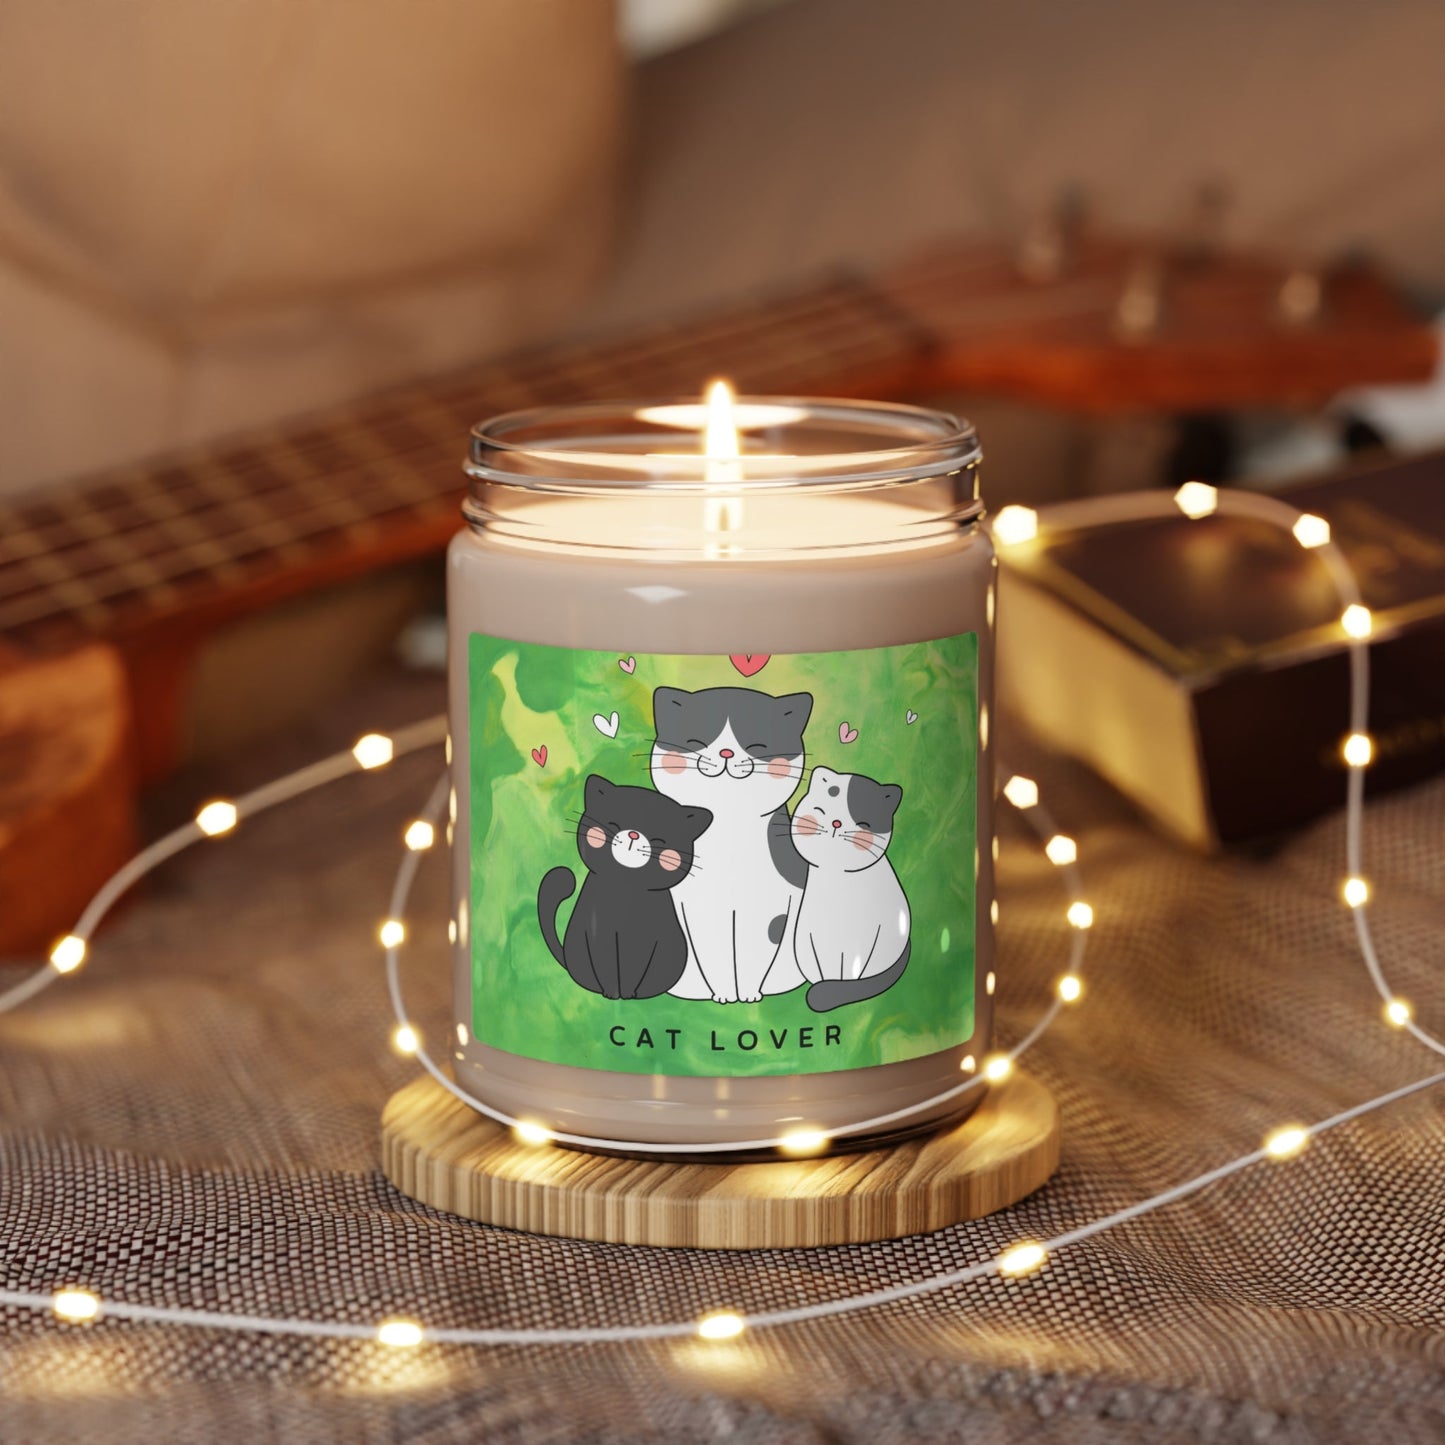 Cat Lover Scented Soy Candle, 9oz - Home Decor - Epileptic Al’s Shop